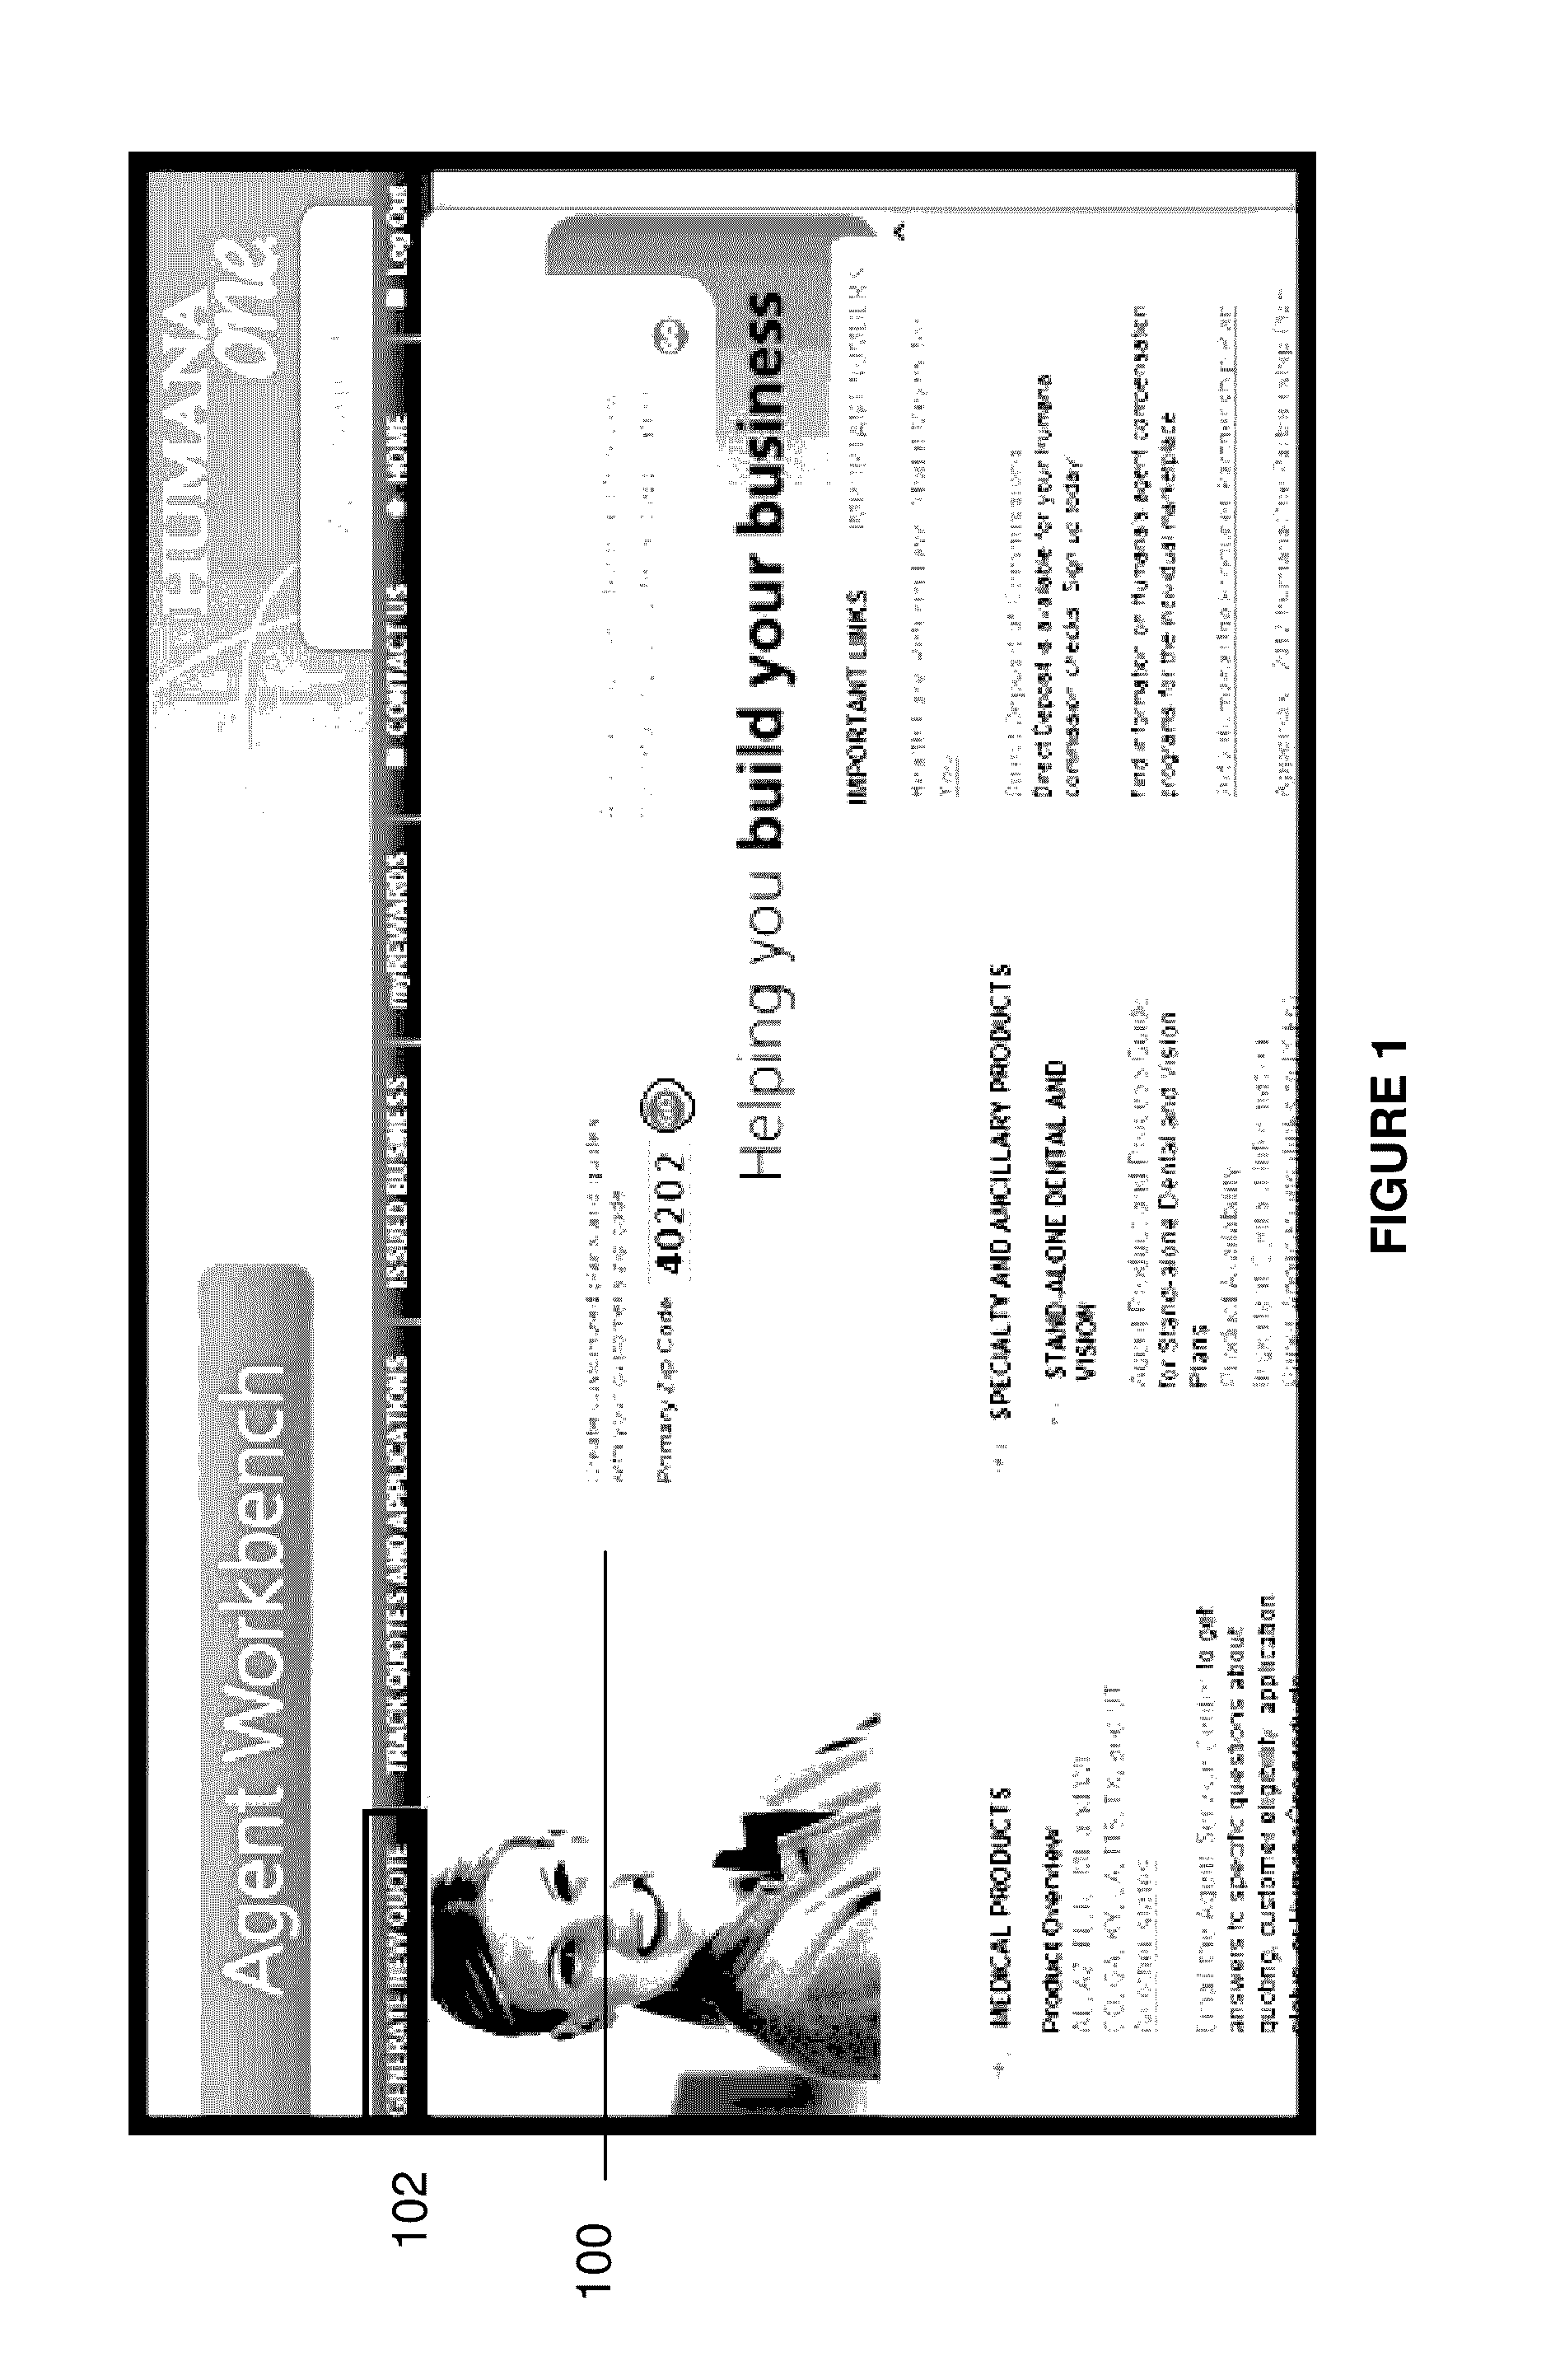 Integrated insurance product quote system and method